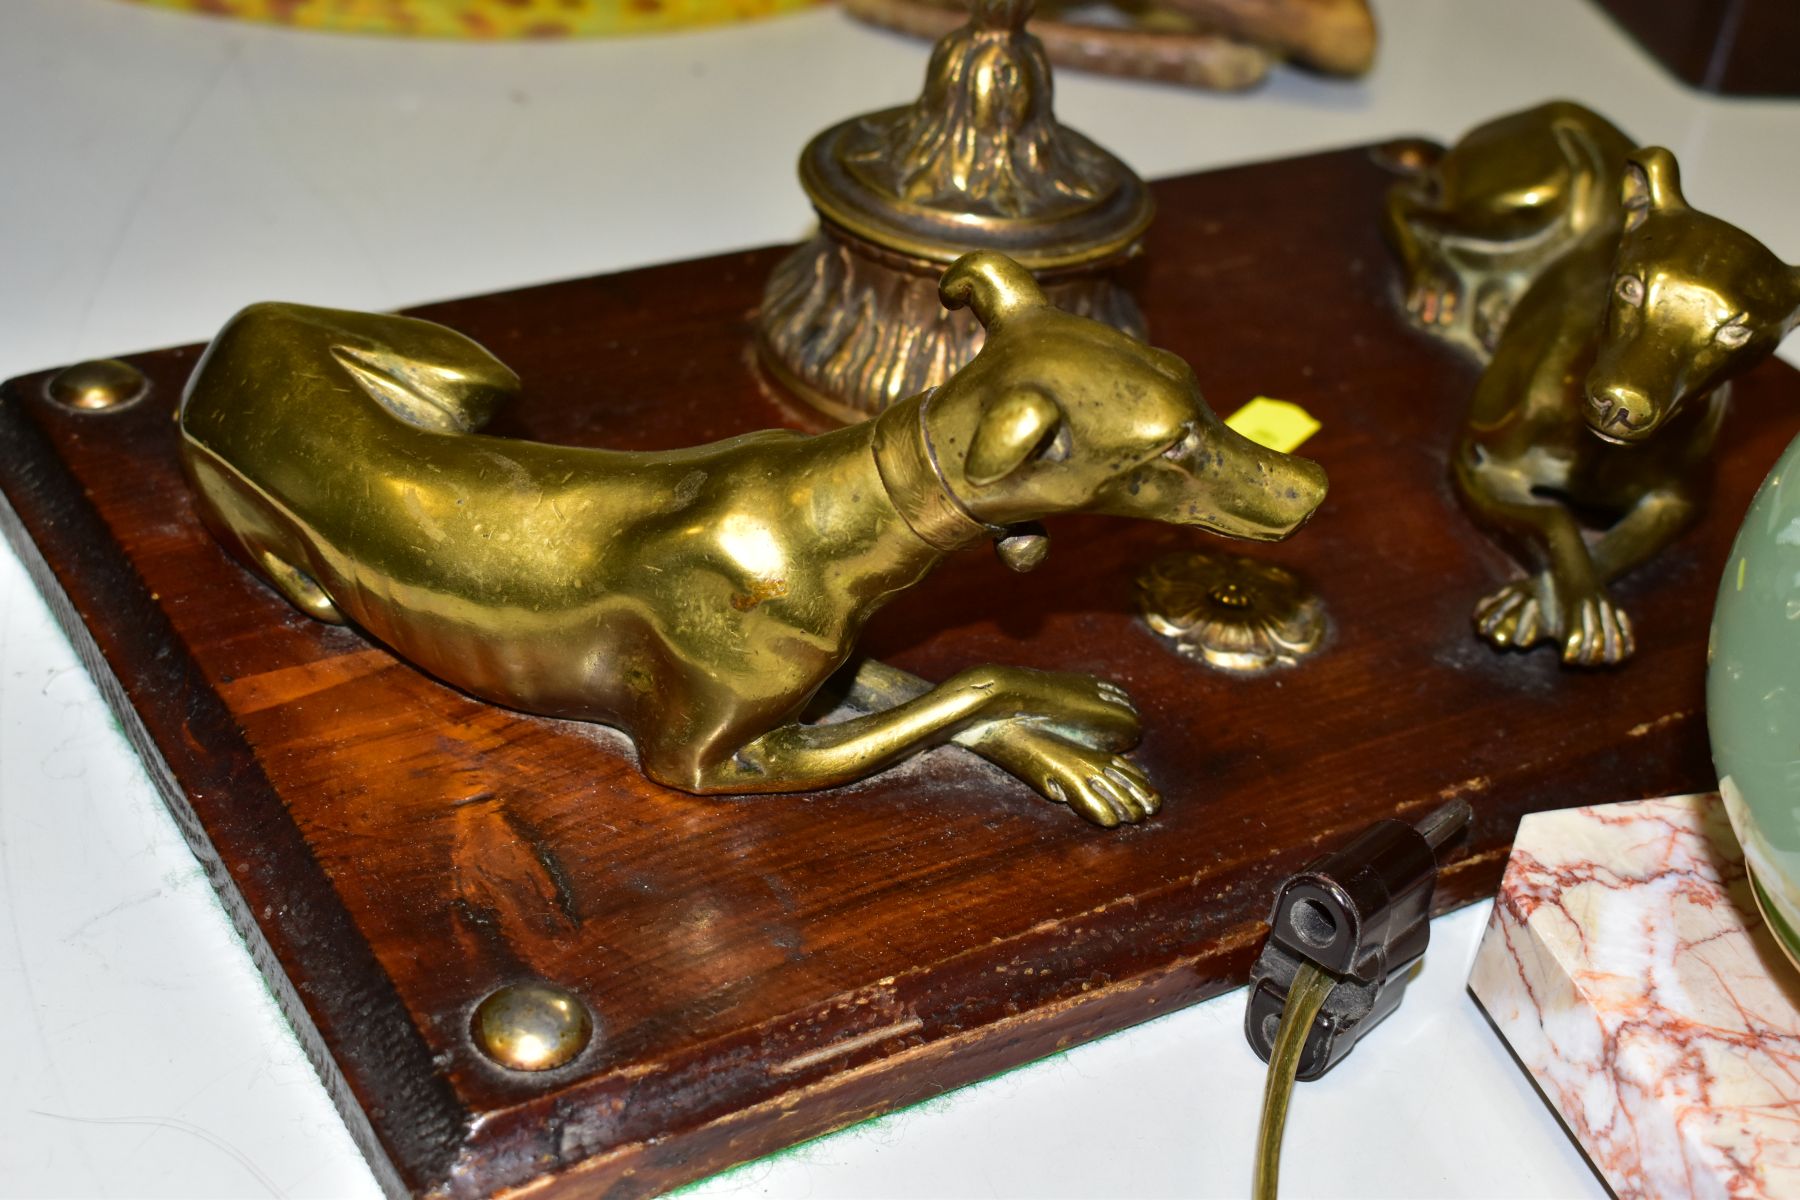 AN ART DECO DESK LAMP DEPICTING A PAIR OF BRONZED ALSATIAN DOGS MOUNTED TO A MARBLE PLINTH, - Image 3 of 8